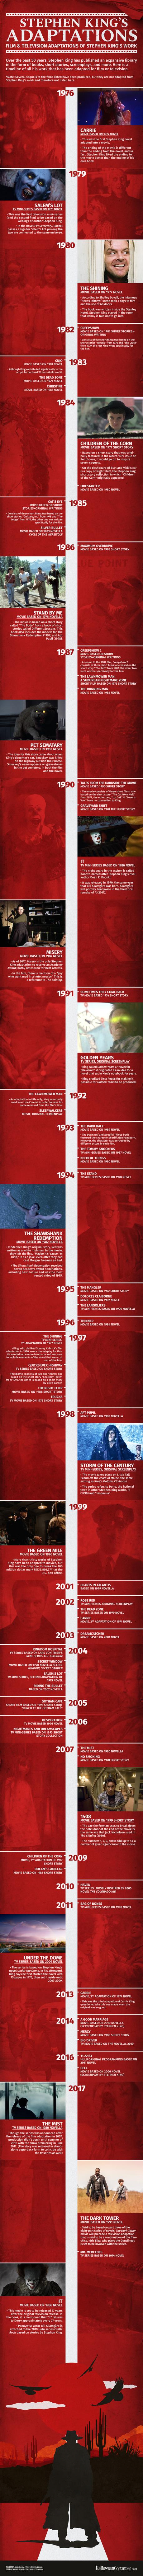 Here’s A Great Infographic To Help You Keep Track of the Many, Many, Many Stephen King Movies & TV Shows